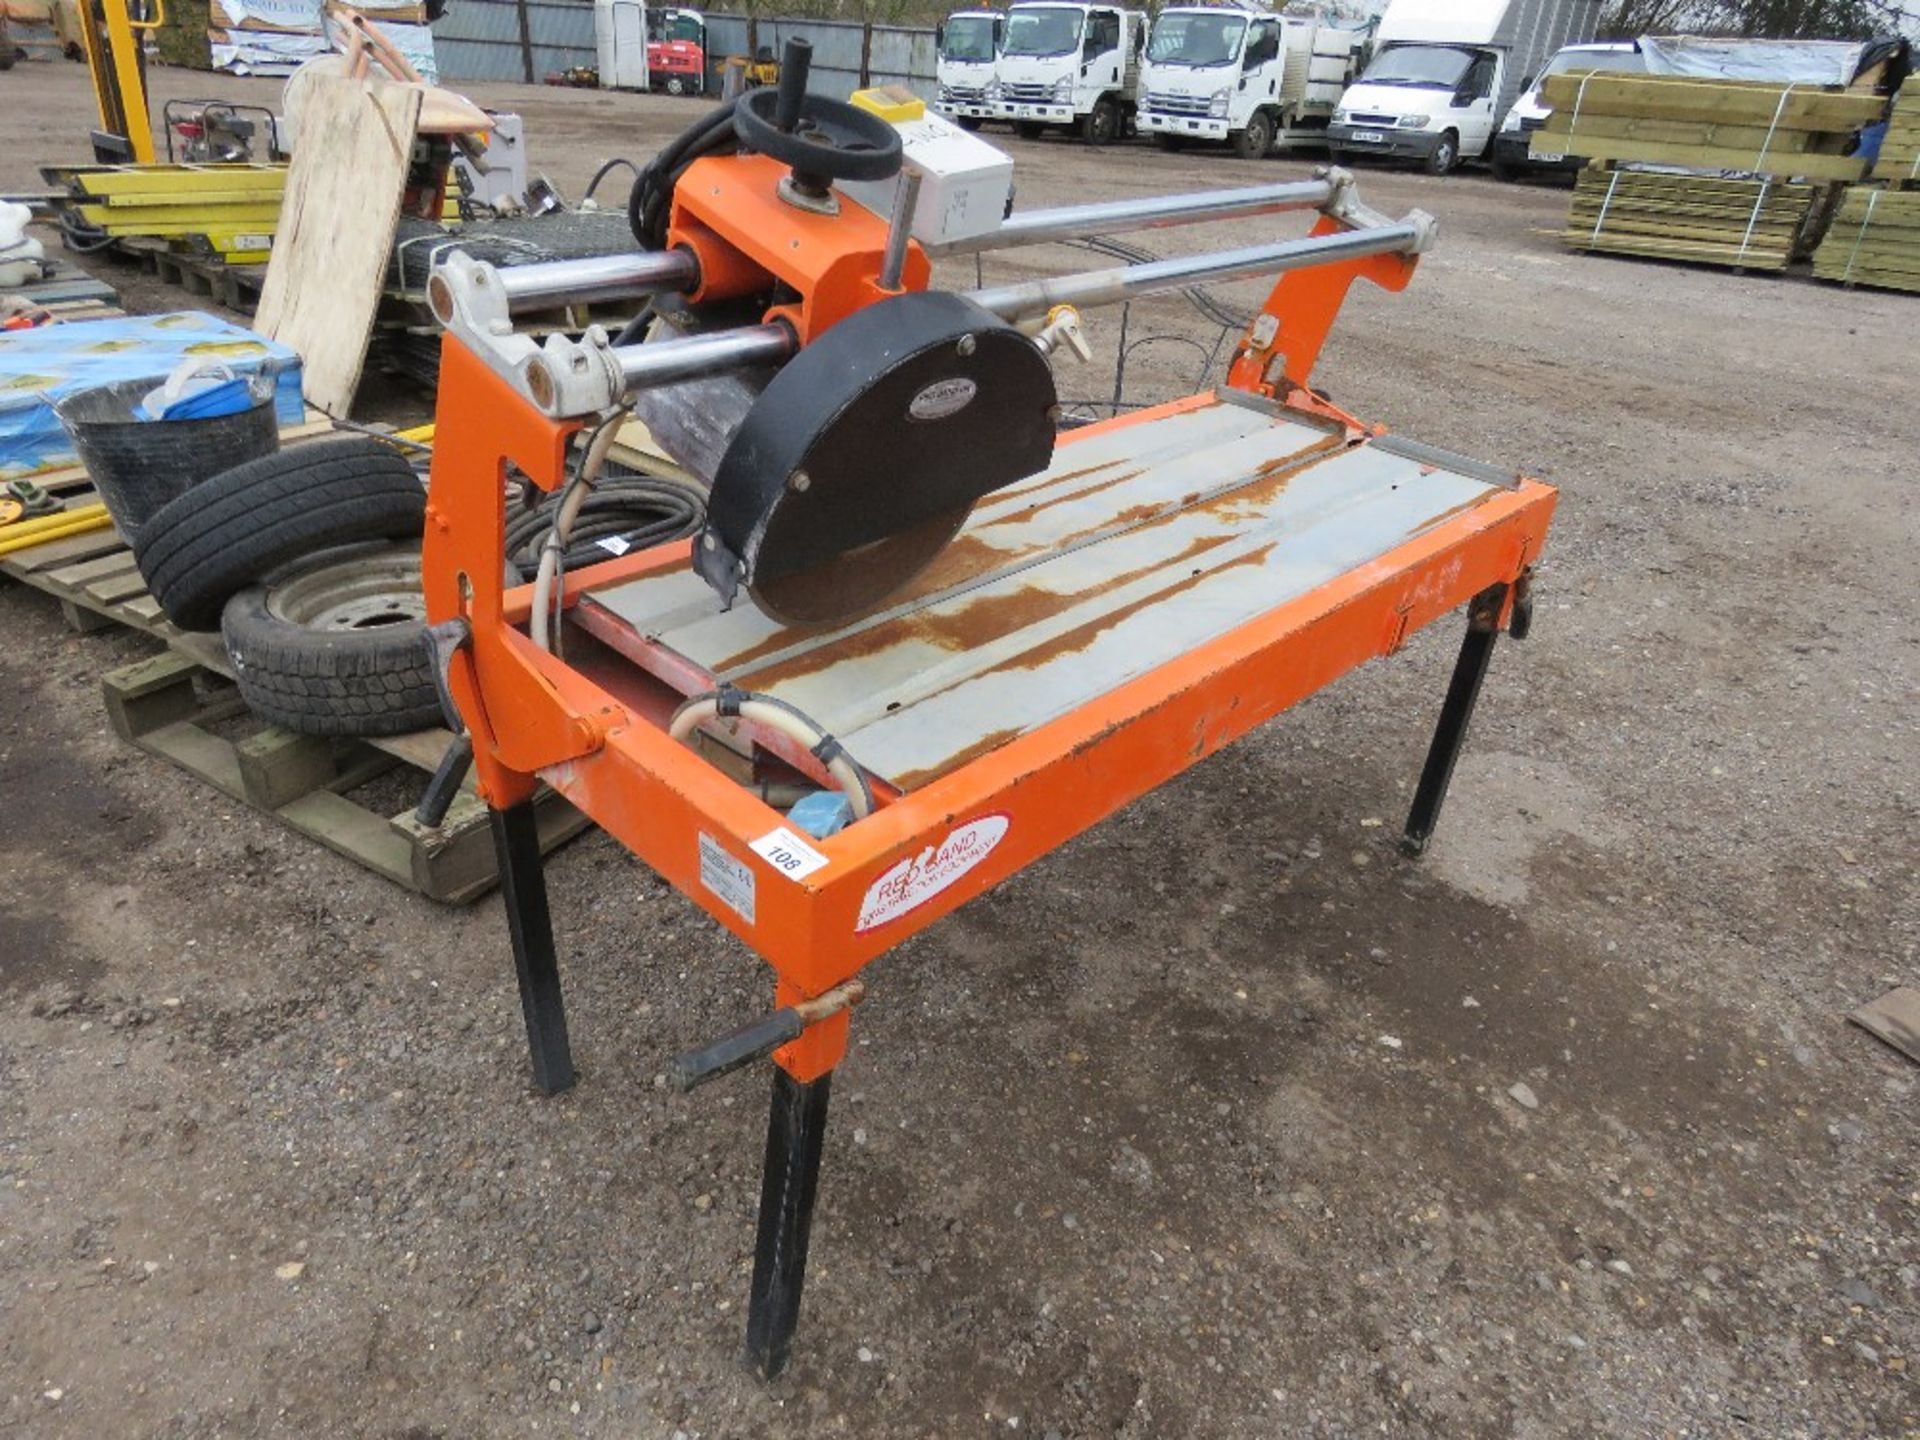 REDBAND SEGA MB120 MONO TILE SAW WITH SLIDING HEAD. RECENTLY WORKING, SURPLUS TO REQUIREMENTS.